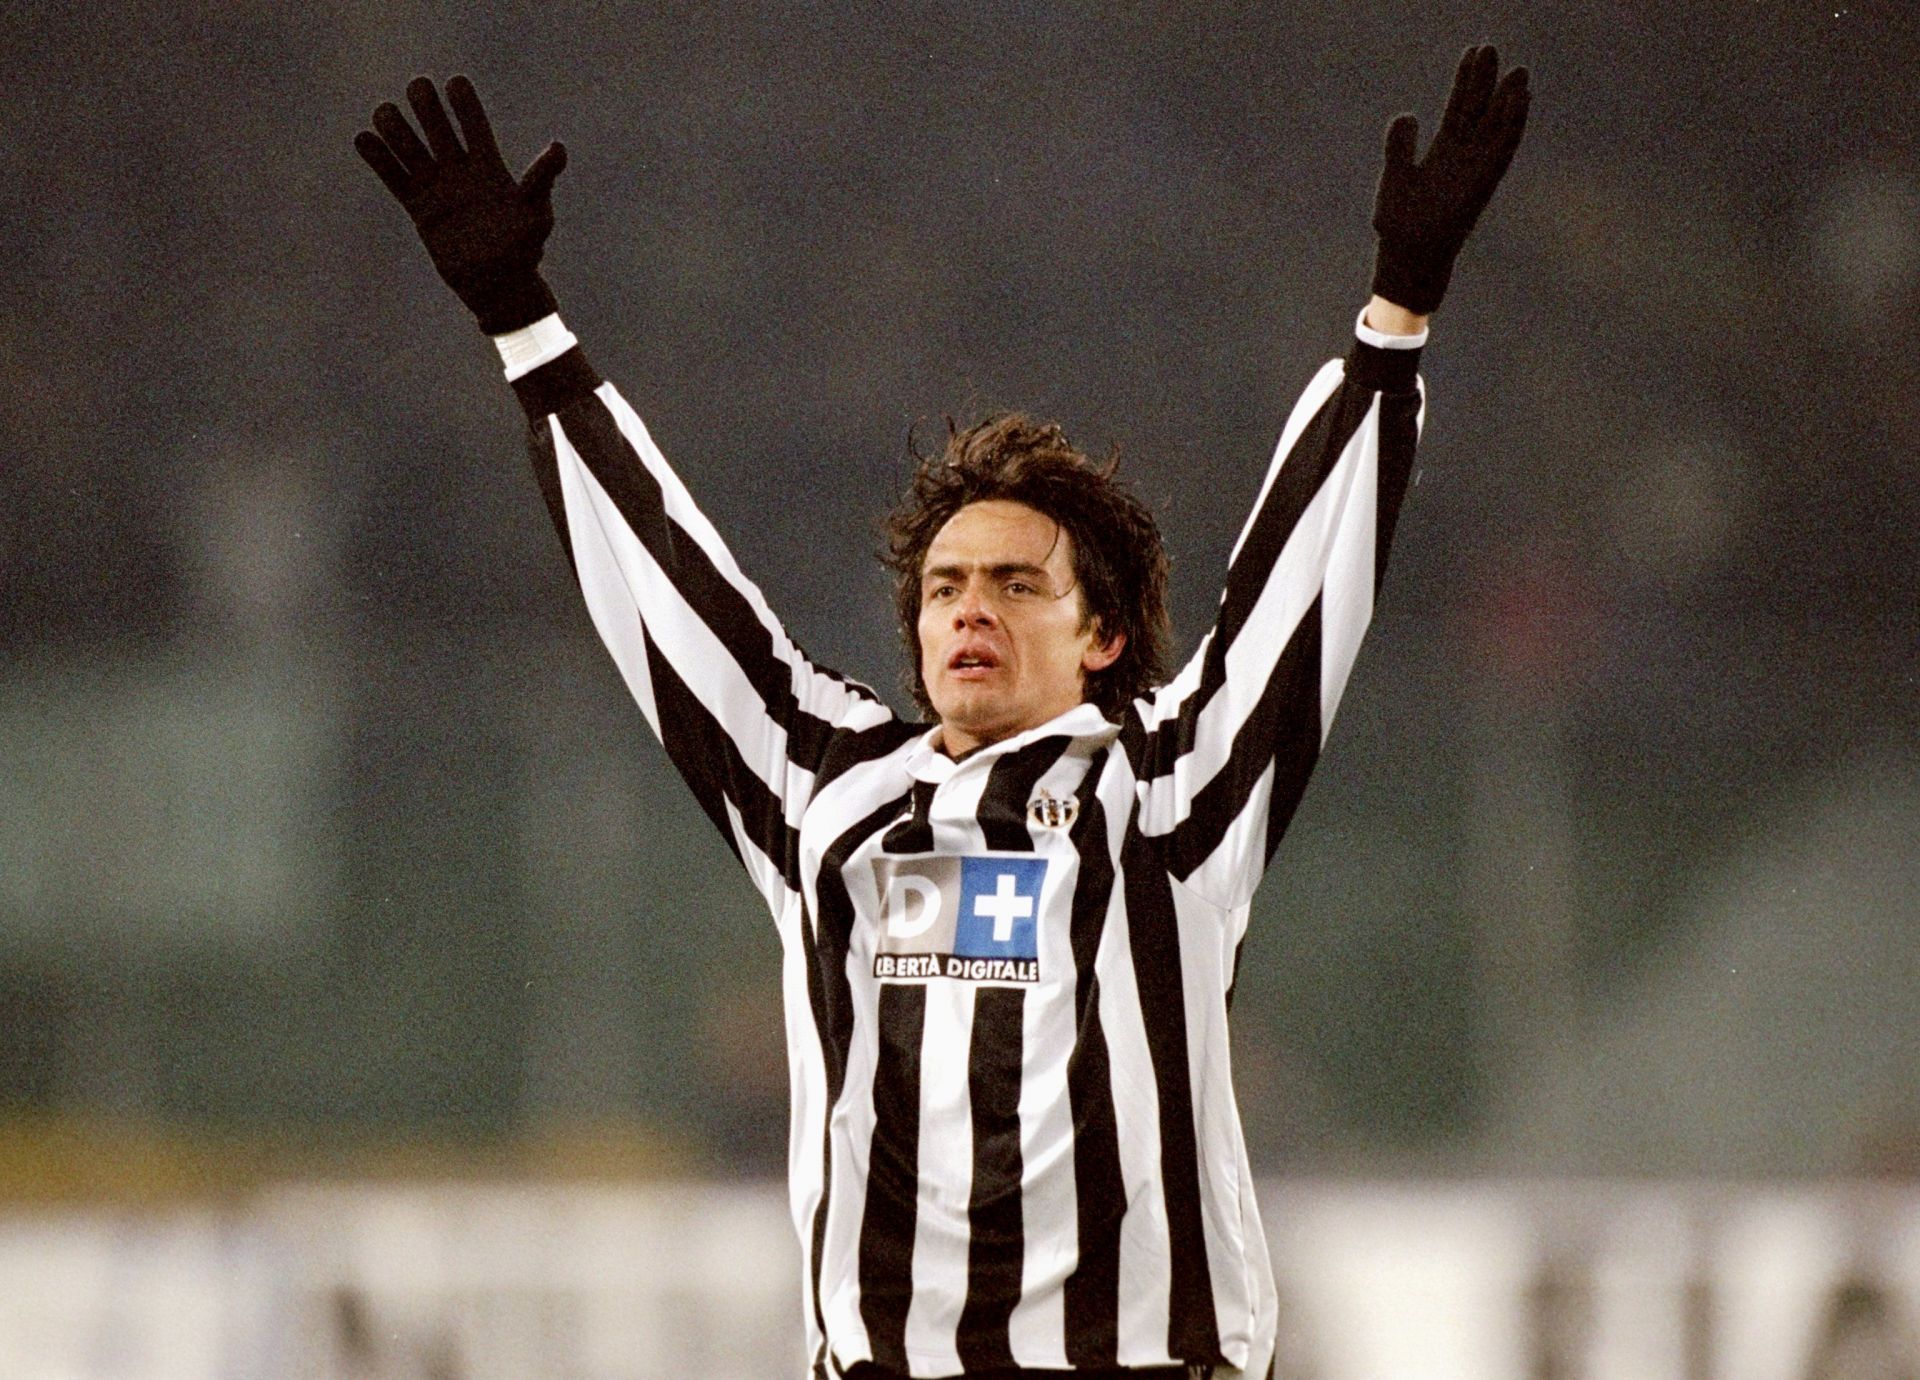 Filippo Inzaghi was a prolific scorer in the Champions League.